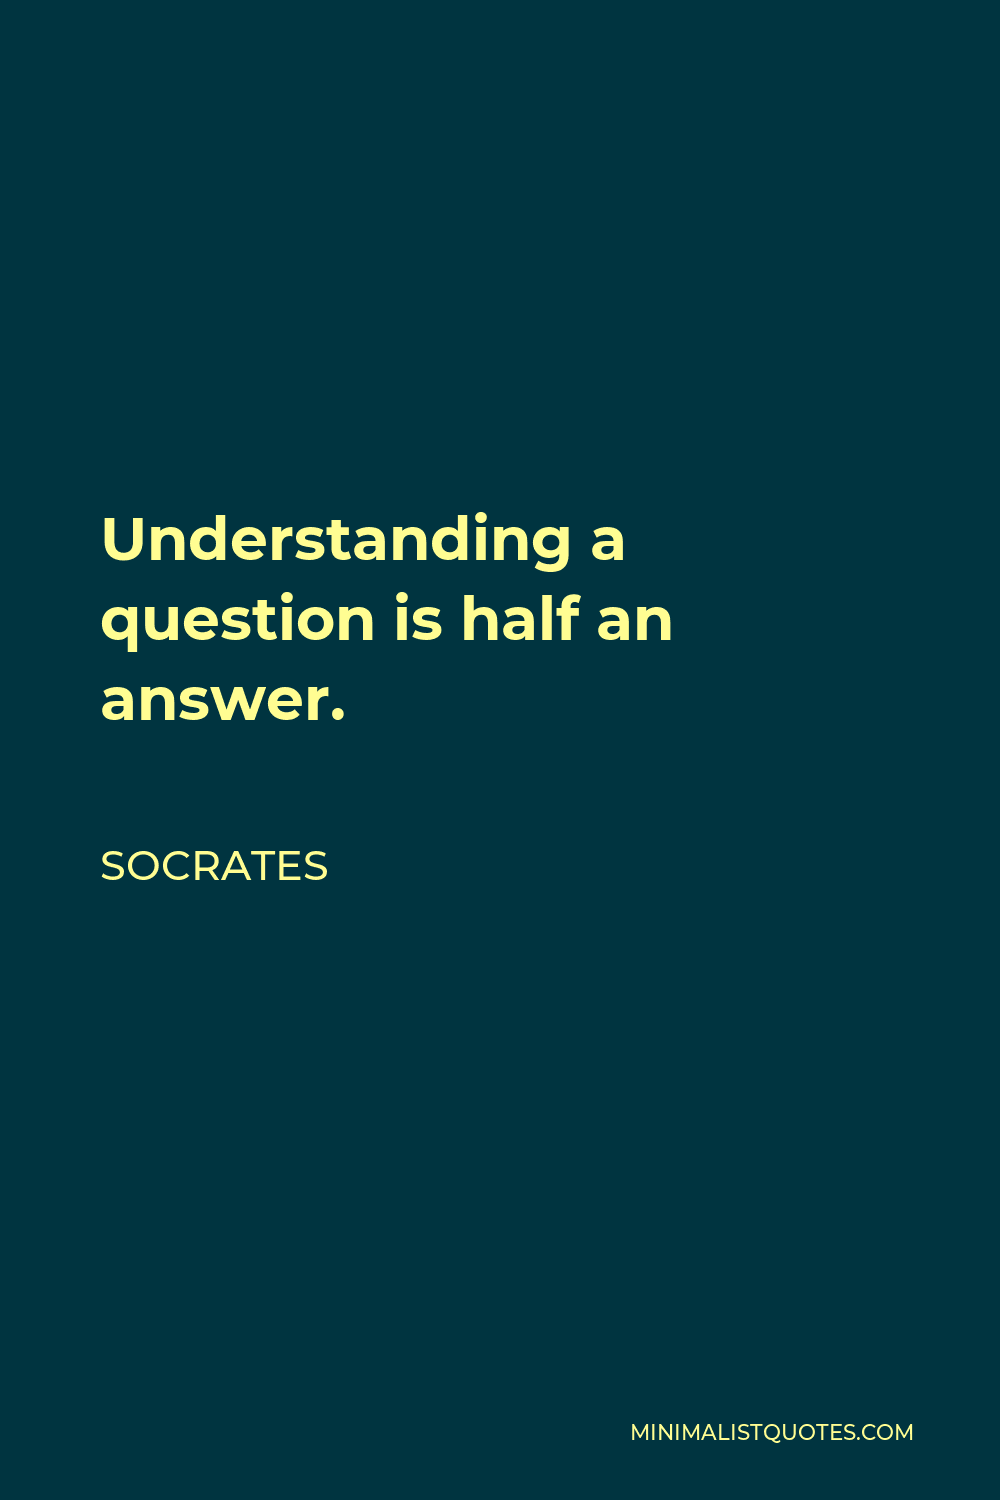 Socrates Quote - Understanding a question is half an answer.